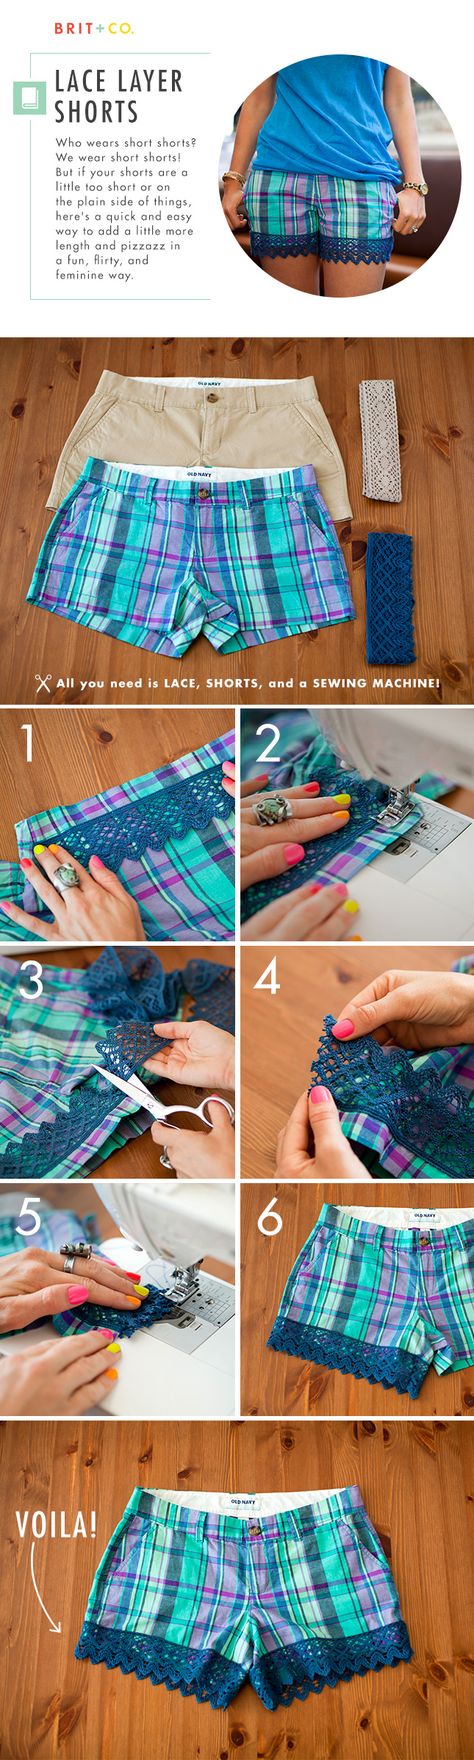 How to Make Lovely Lace Shorts | Brit + Co. Need this for daughters shorts Make Shorts Longer, Diy Clothing Ideas, Diy Lace Shorts, Diy Clothes Organiser, Diy Clothes Alterations, Clothes Alterations, Umgestaltete Shirts, Diy Clothes Refashion Videos, Diy Clothes For Women